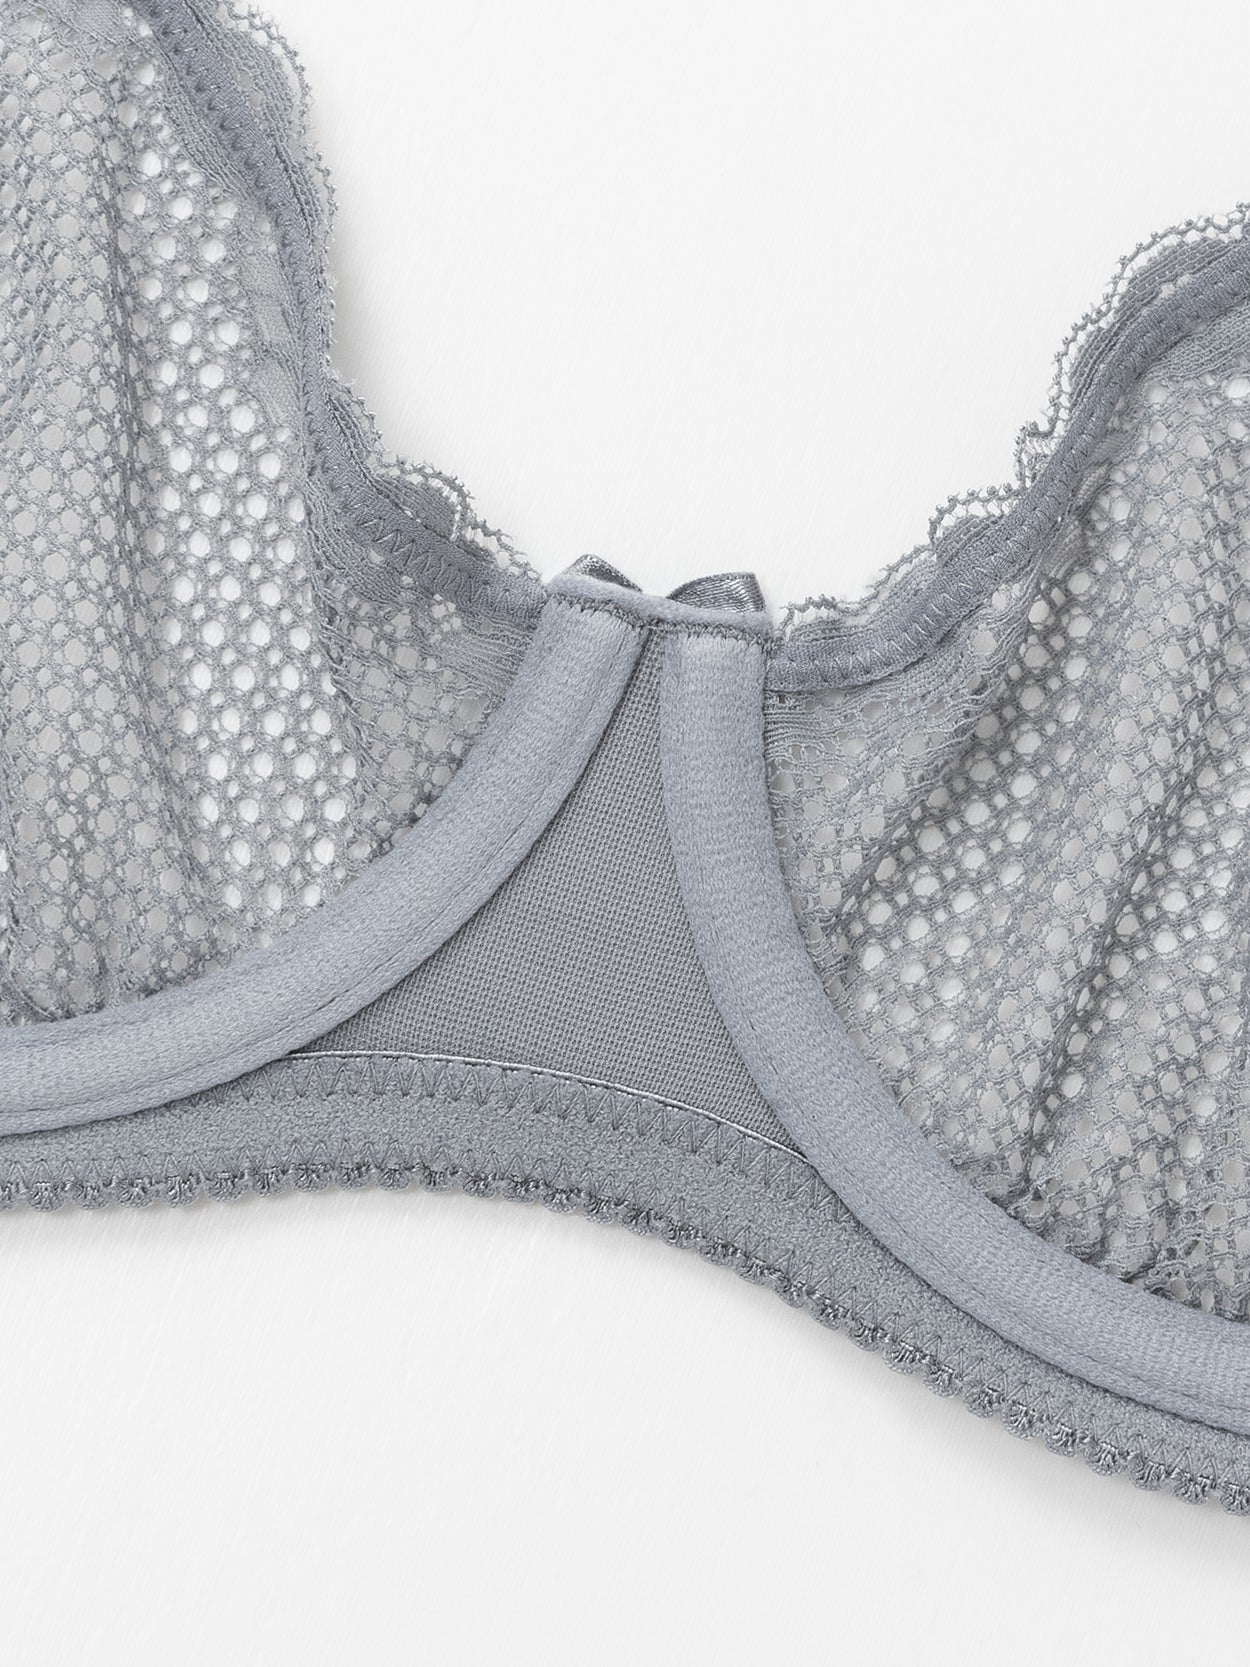 See Through 1/2 Cup Lace Underwire Demi Bra – WingsLove